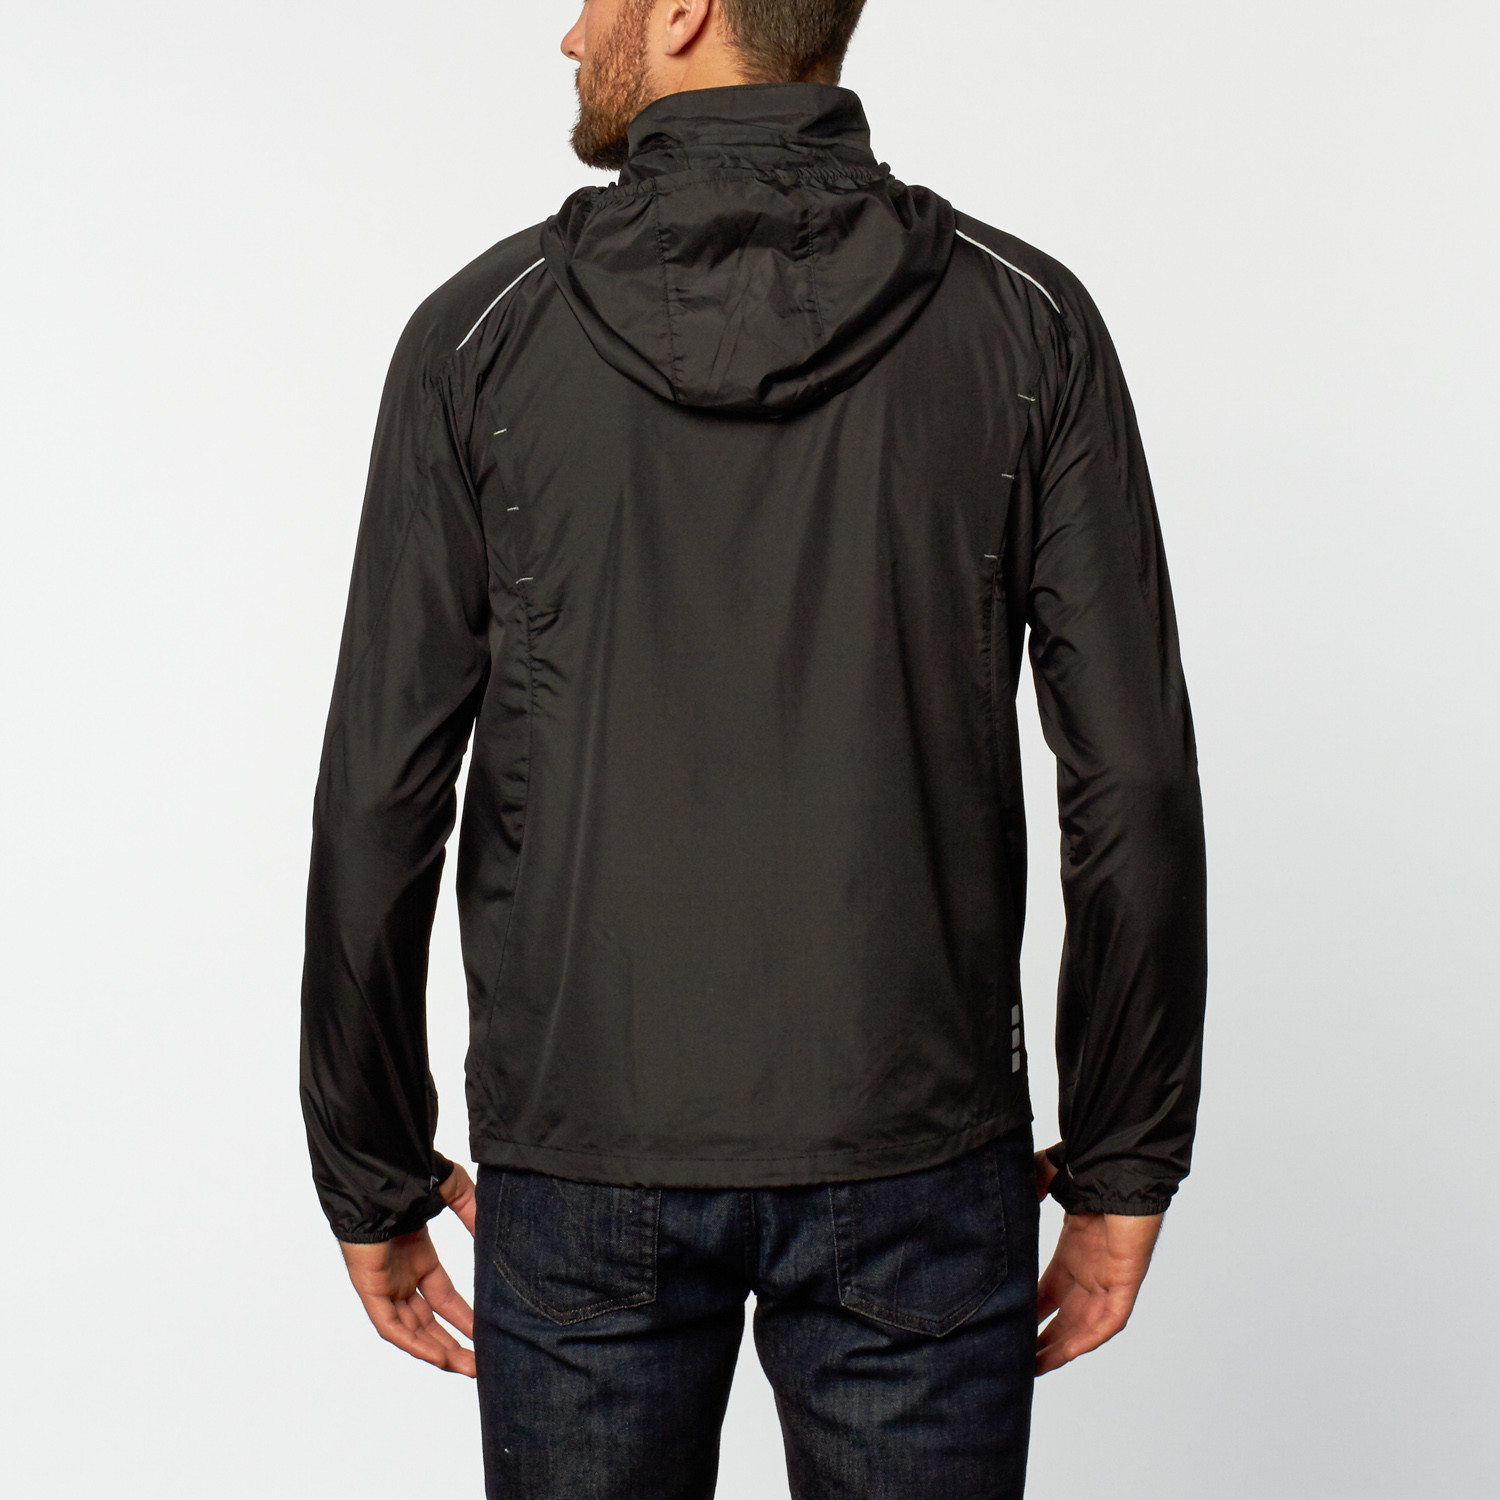 Rain Jacket // Black (S) - Mercedes-Benz Clothing - Touch of Modern